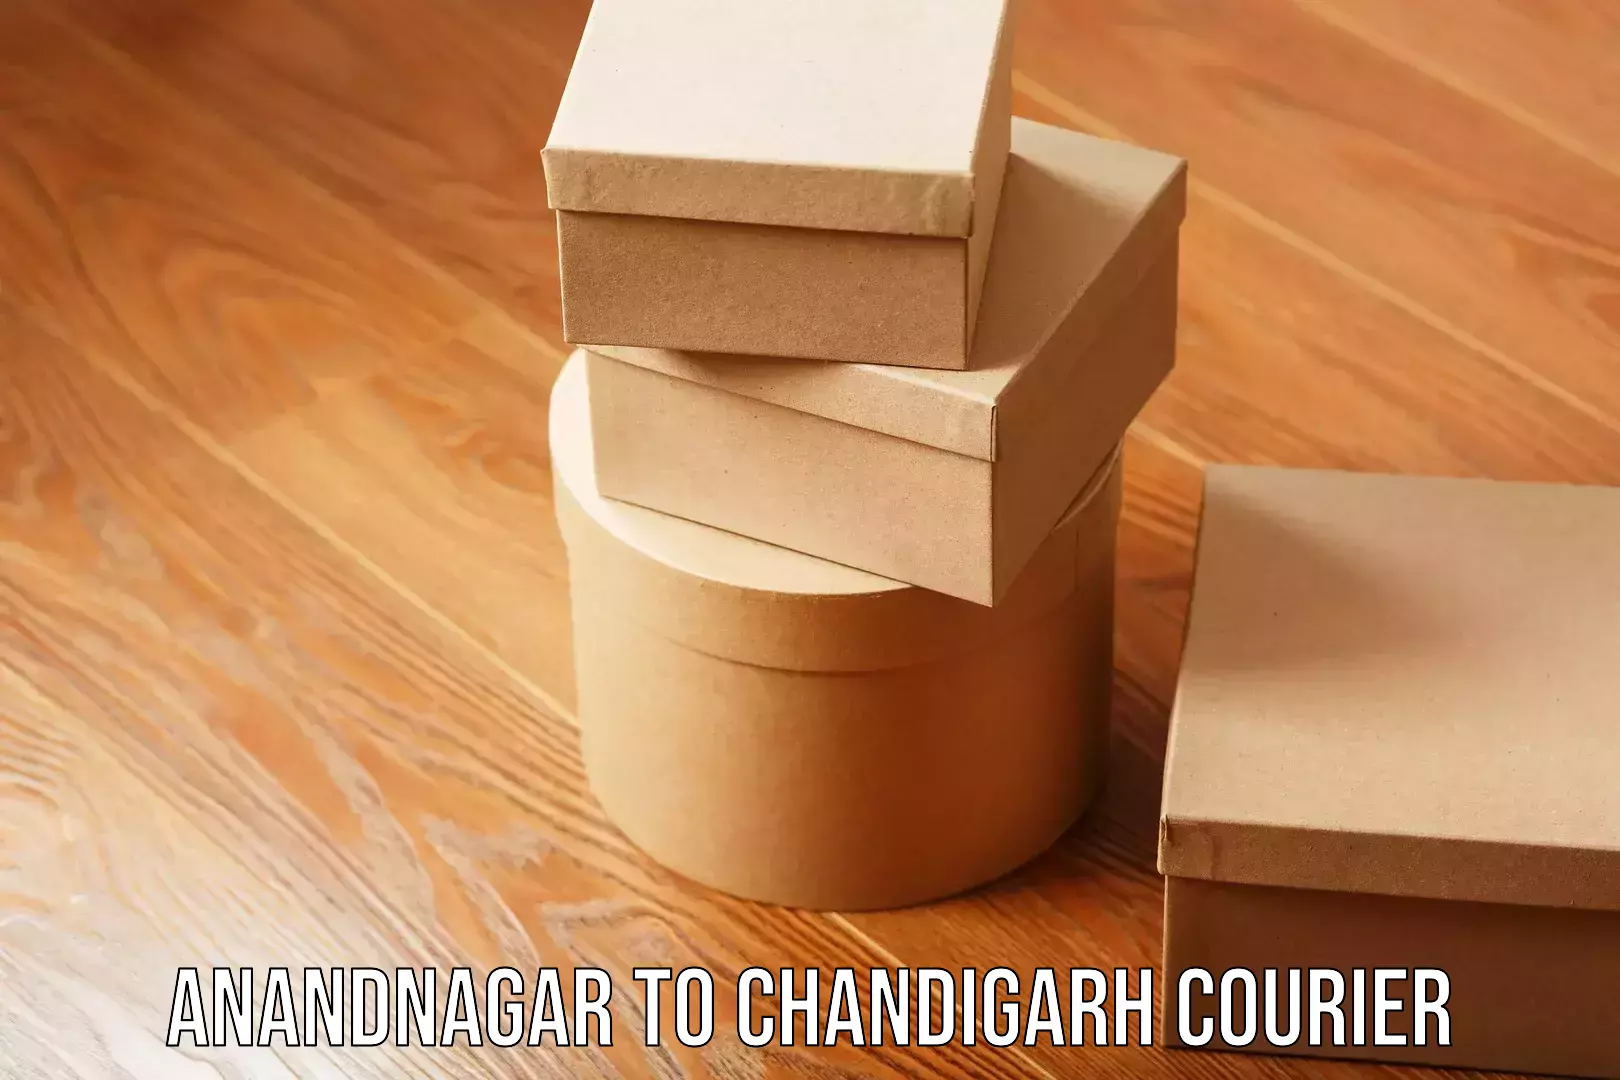 Easy access courier services Anandnagar to Chandigarh